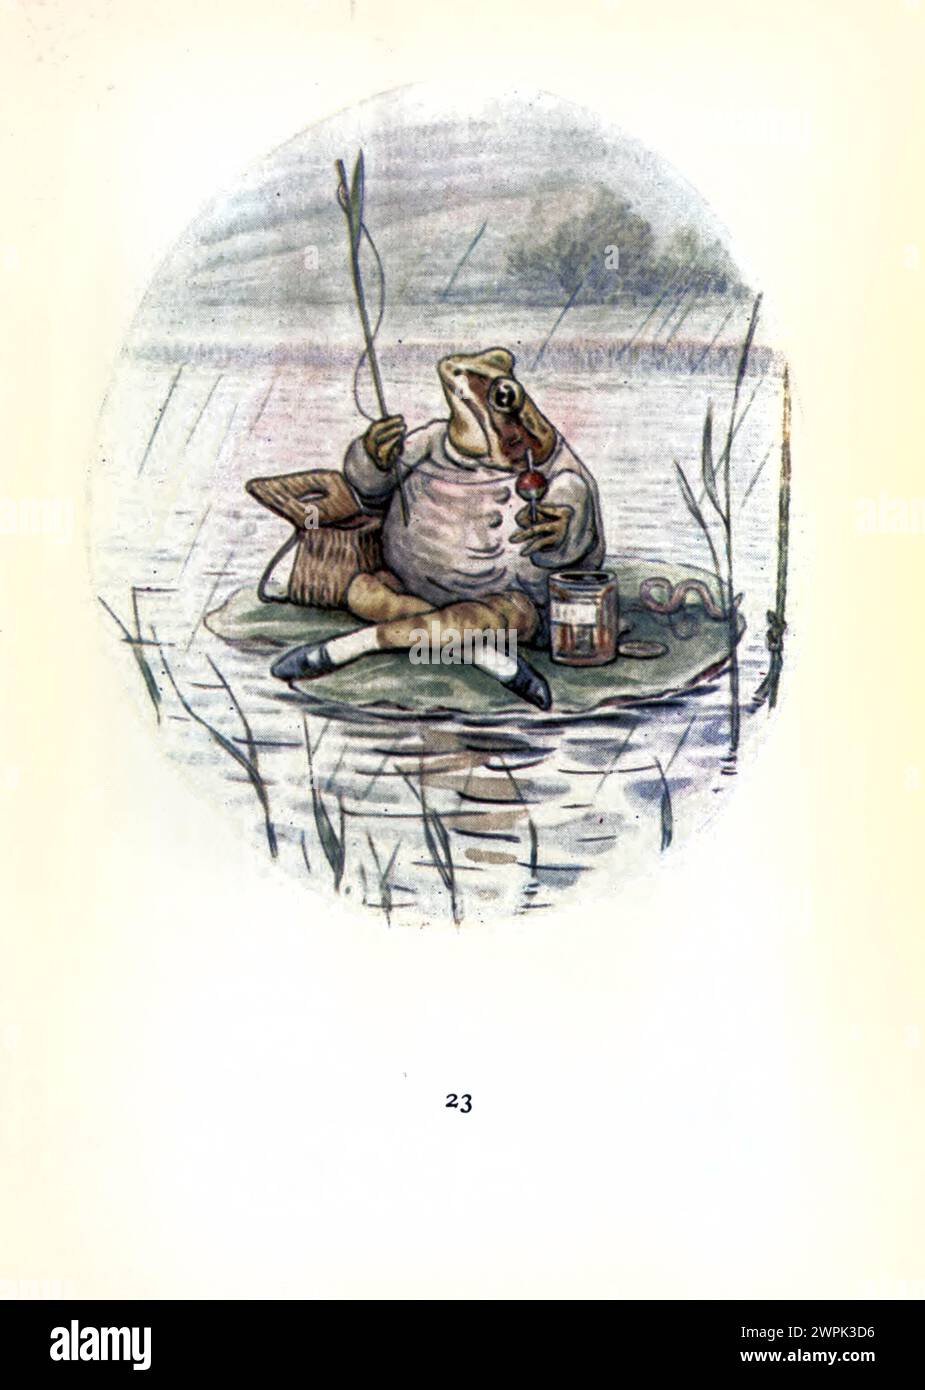 The tale of Mr. Jeremy Fisher by Beatrix Potter, The Tale of Mr. Jeremy Fisher is a children's book, written and illustrated by Beatrix Potter. It was published by Frederick Warne & Co. in July 1906. Jeremy Fisher is a frog that lives in a "slippy-sloppy" house at the edge of a pond. During one rainy day, he collects worms for fishing and sets off across the pond on his lily-pad boat. He plans to invite his friends for dinner if he catches more than five minnows. He encounters all sorts of setbacks to his goal, and escapes a large trout who tries to swallow him. He swims for shore, decides he Stock Photo